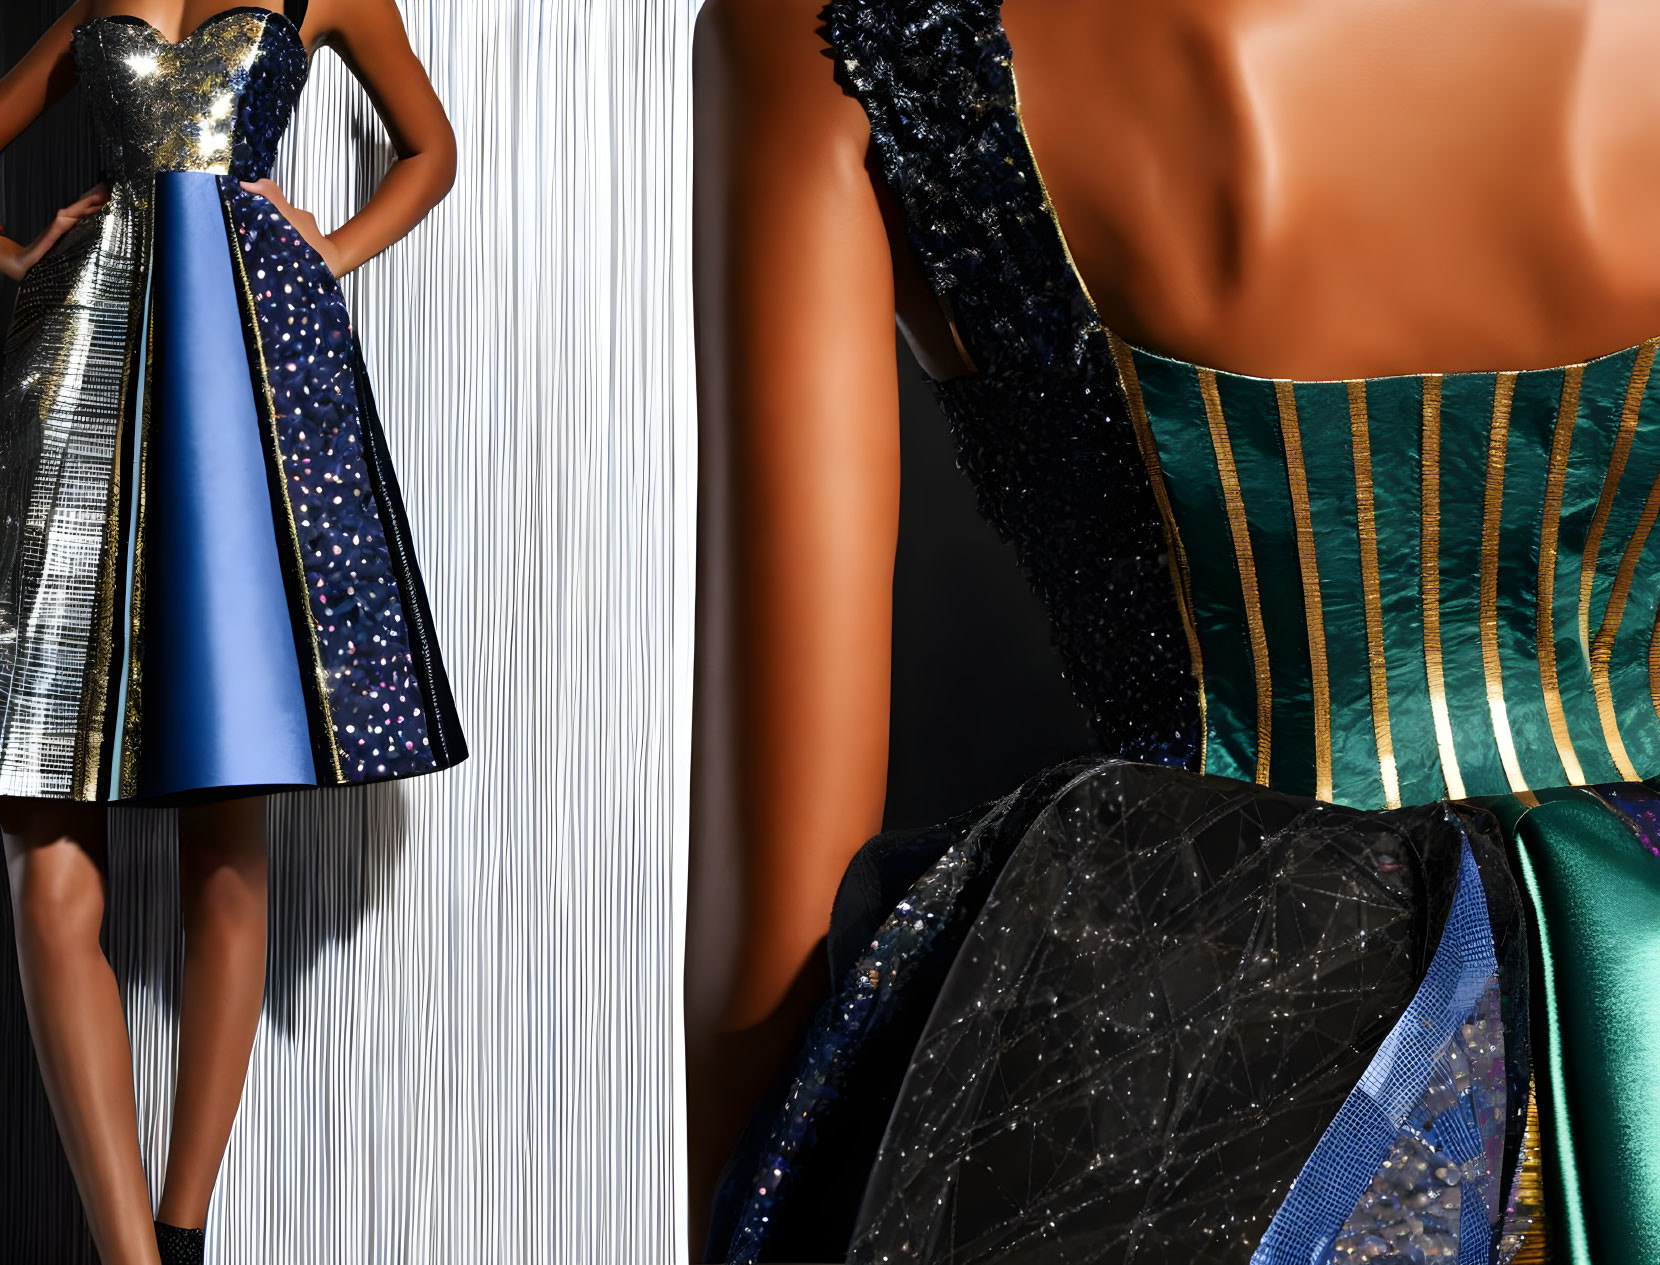 Two elegant dresses with intricate designs in blue, gold, and green hues